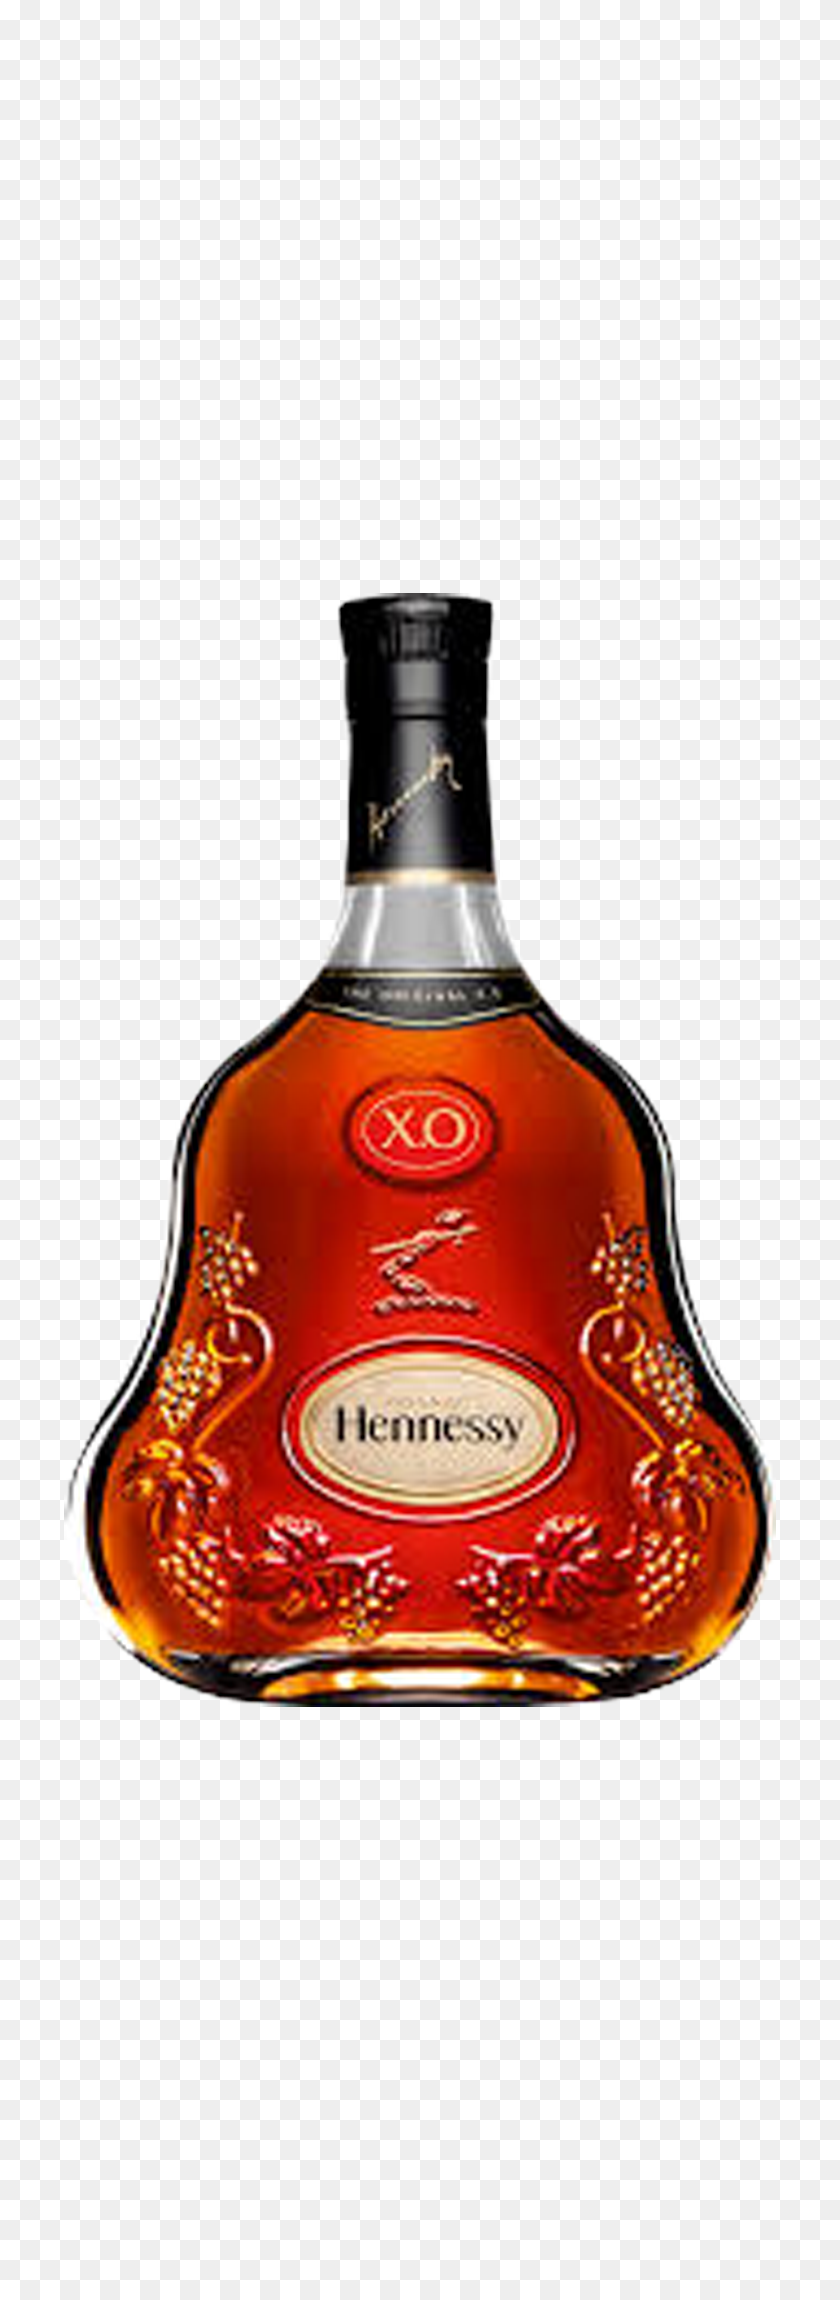 752x2240 Hennessy Xo Cognac - Hennessy Bottle PNG